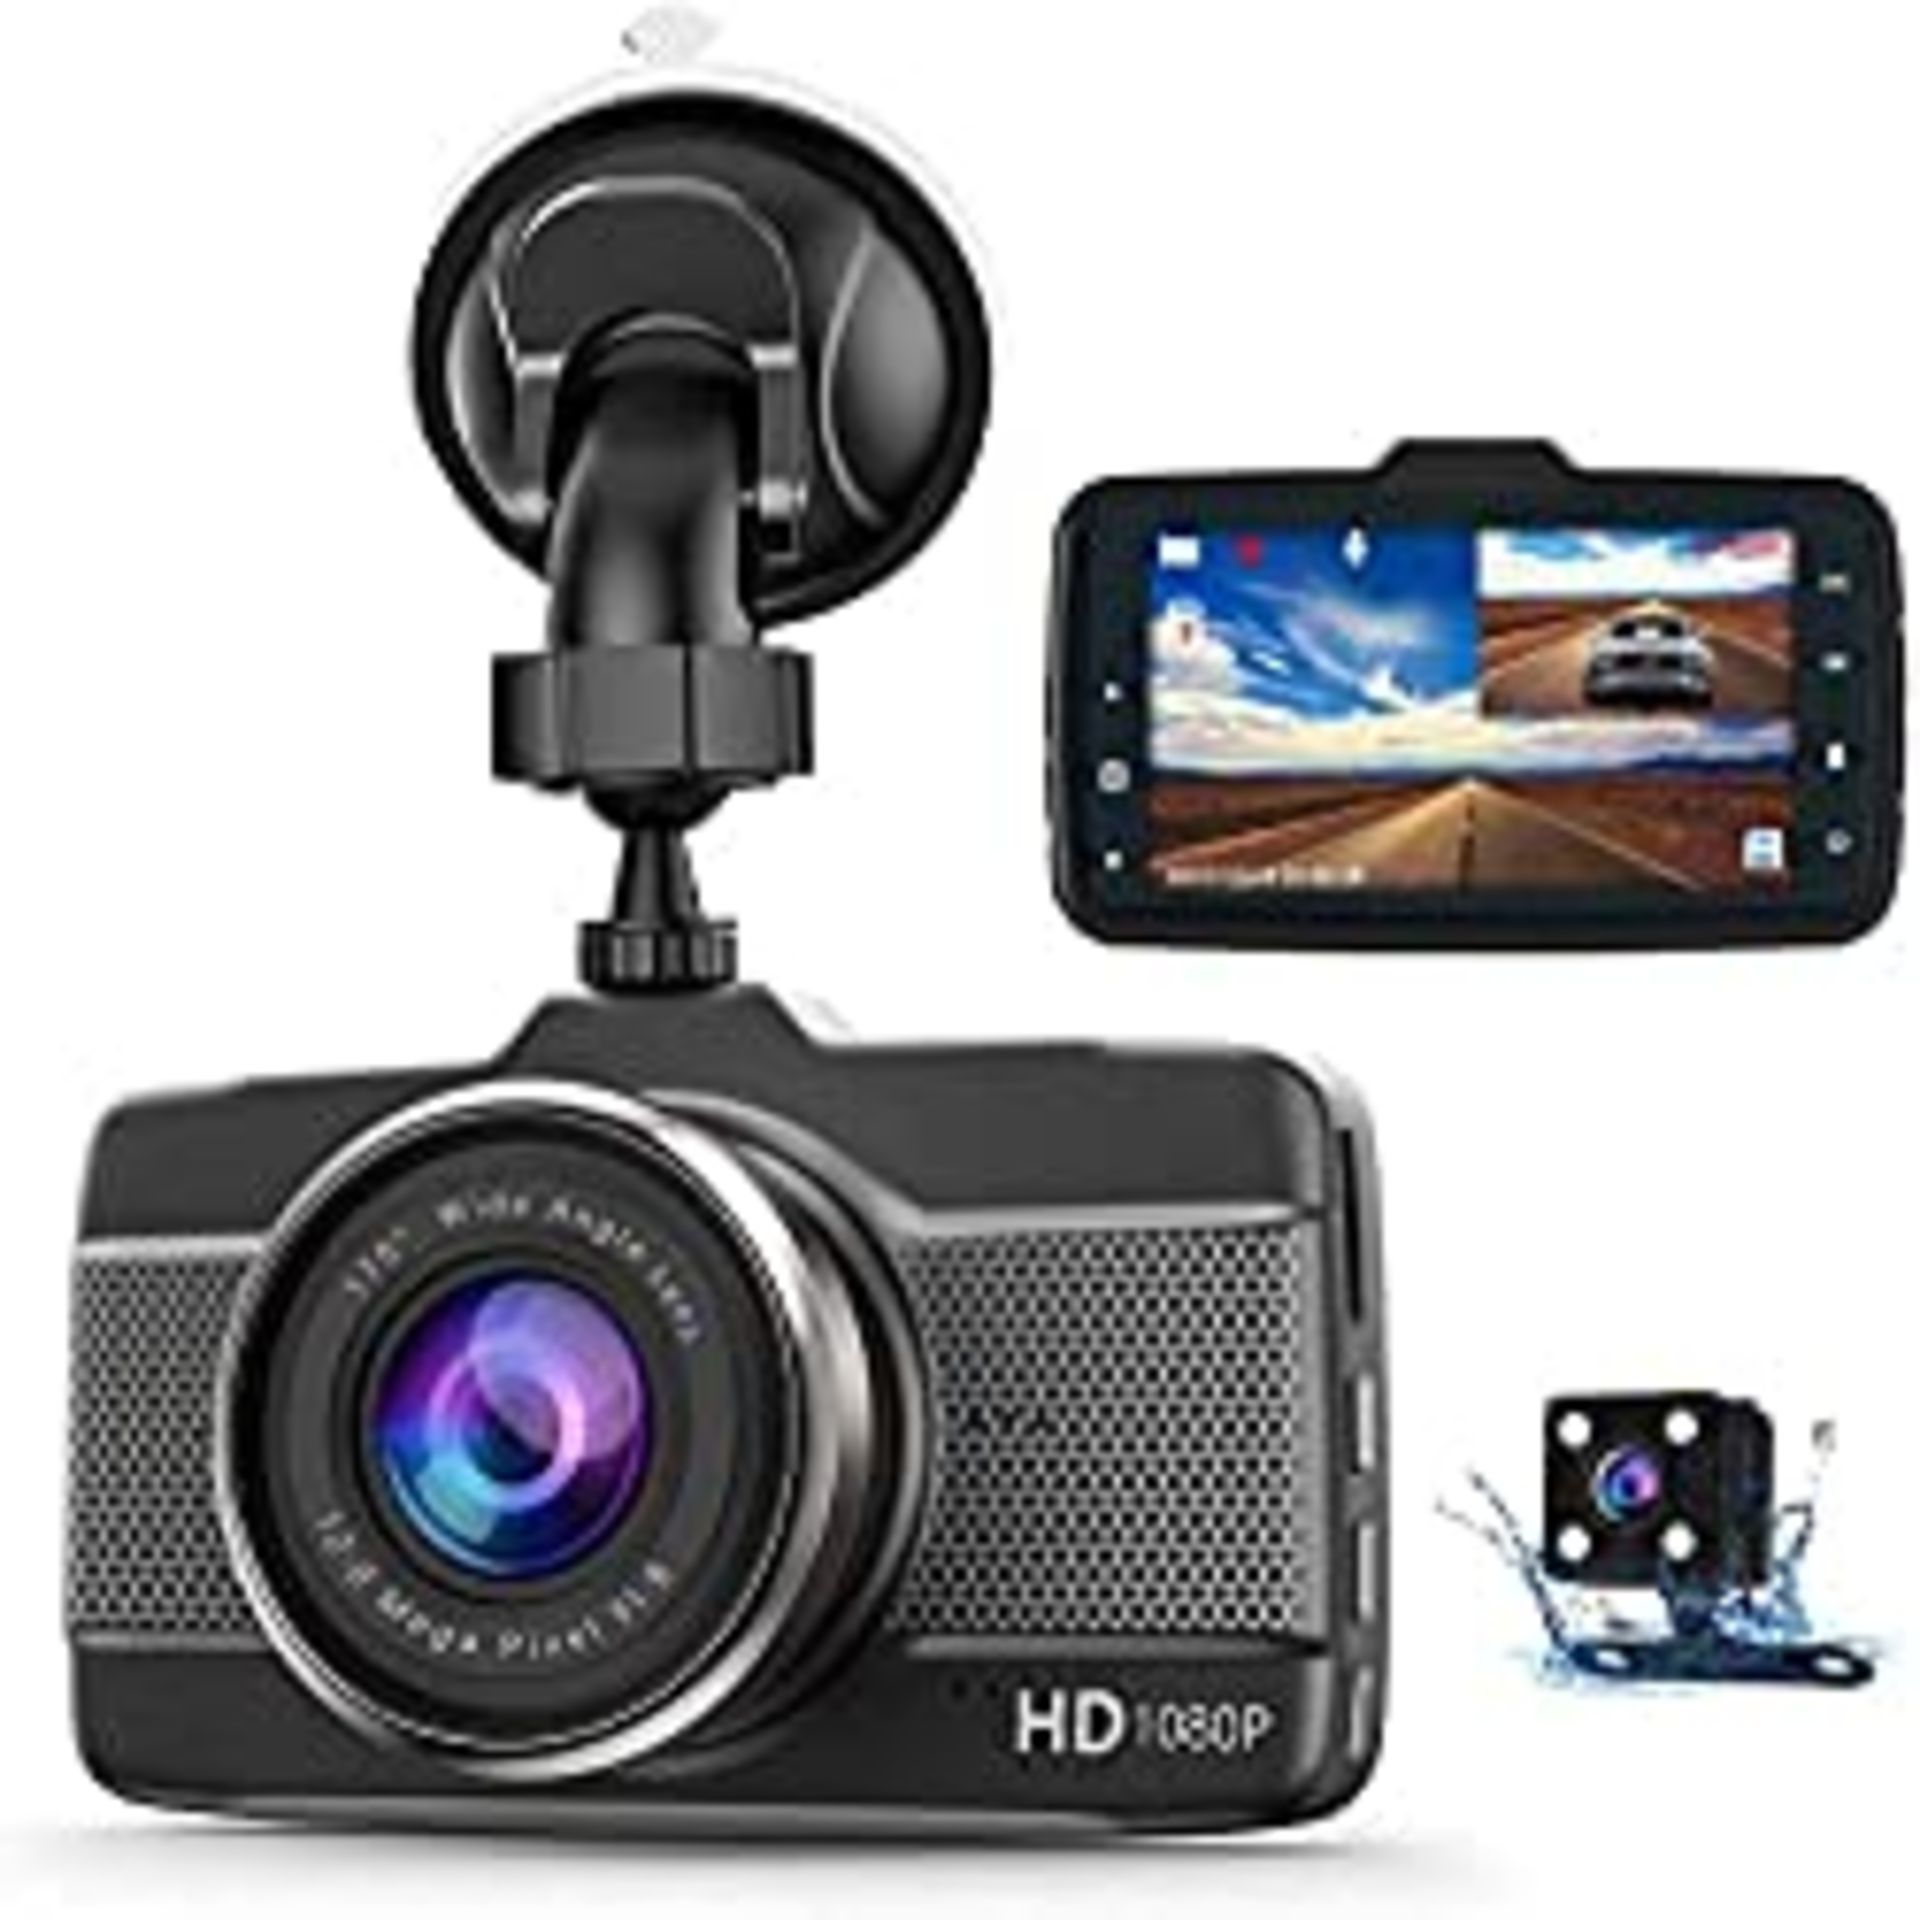 RRP £44.65 Claoner Dash Cams for Cars Front and Rear 1080P Full HD Dashcam